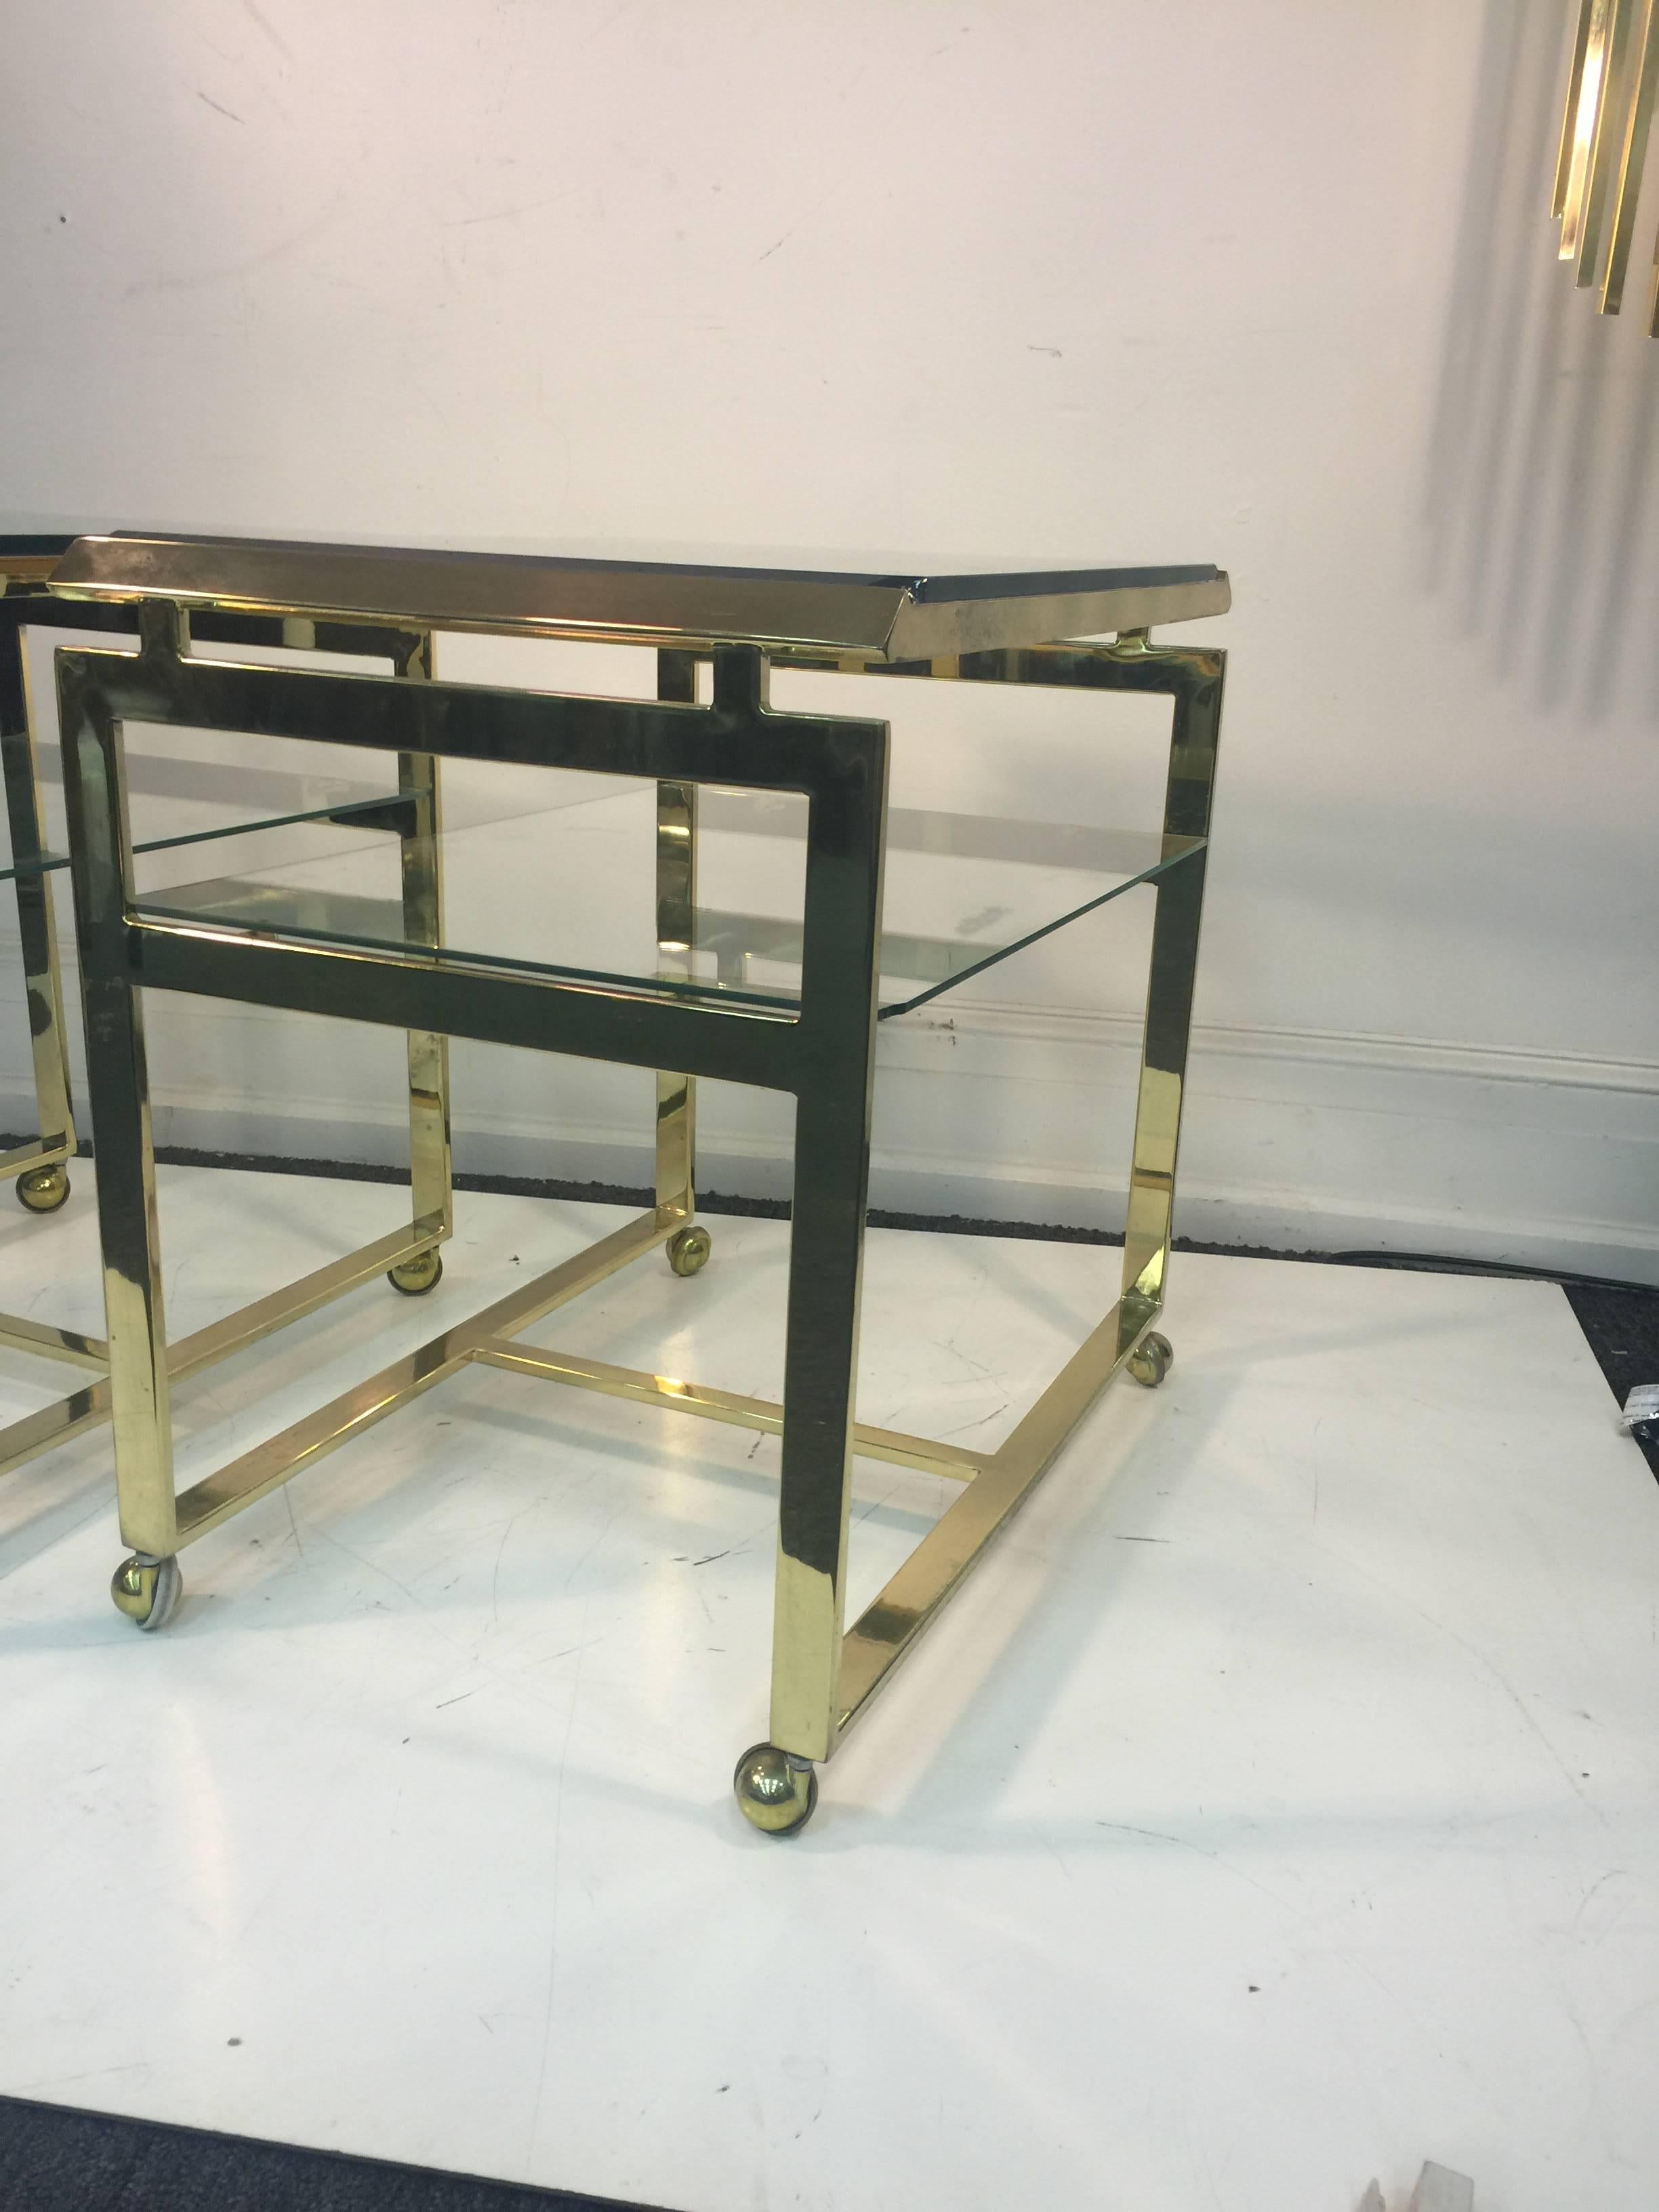 A striking pair of brass and glass flat bar tea or serving carts by Milo Baughman, circa 1970. Good vintage condition with age appropriate wear.
 